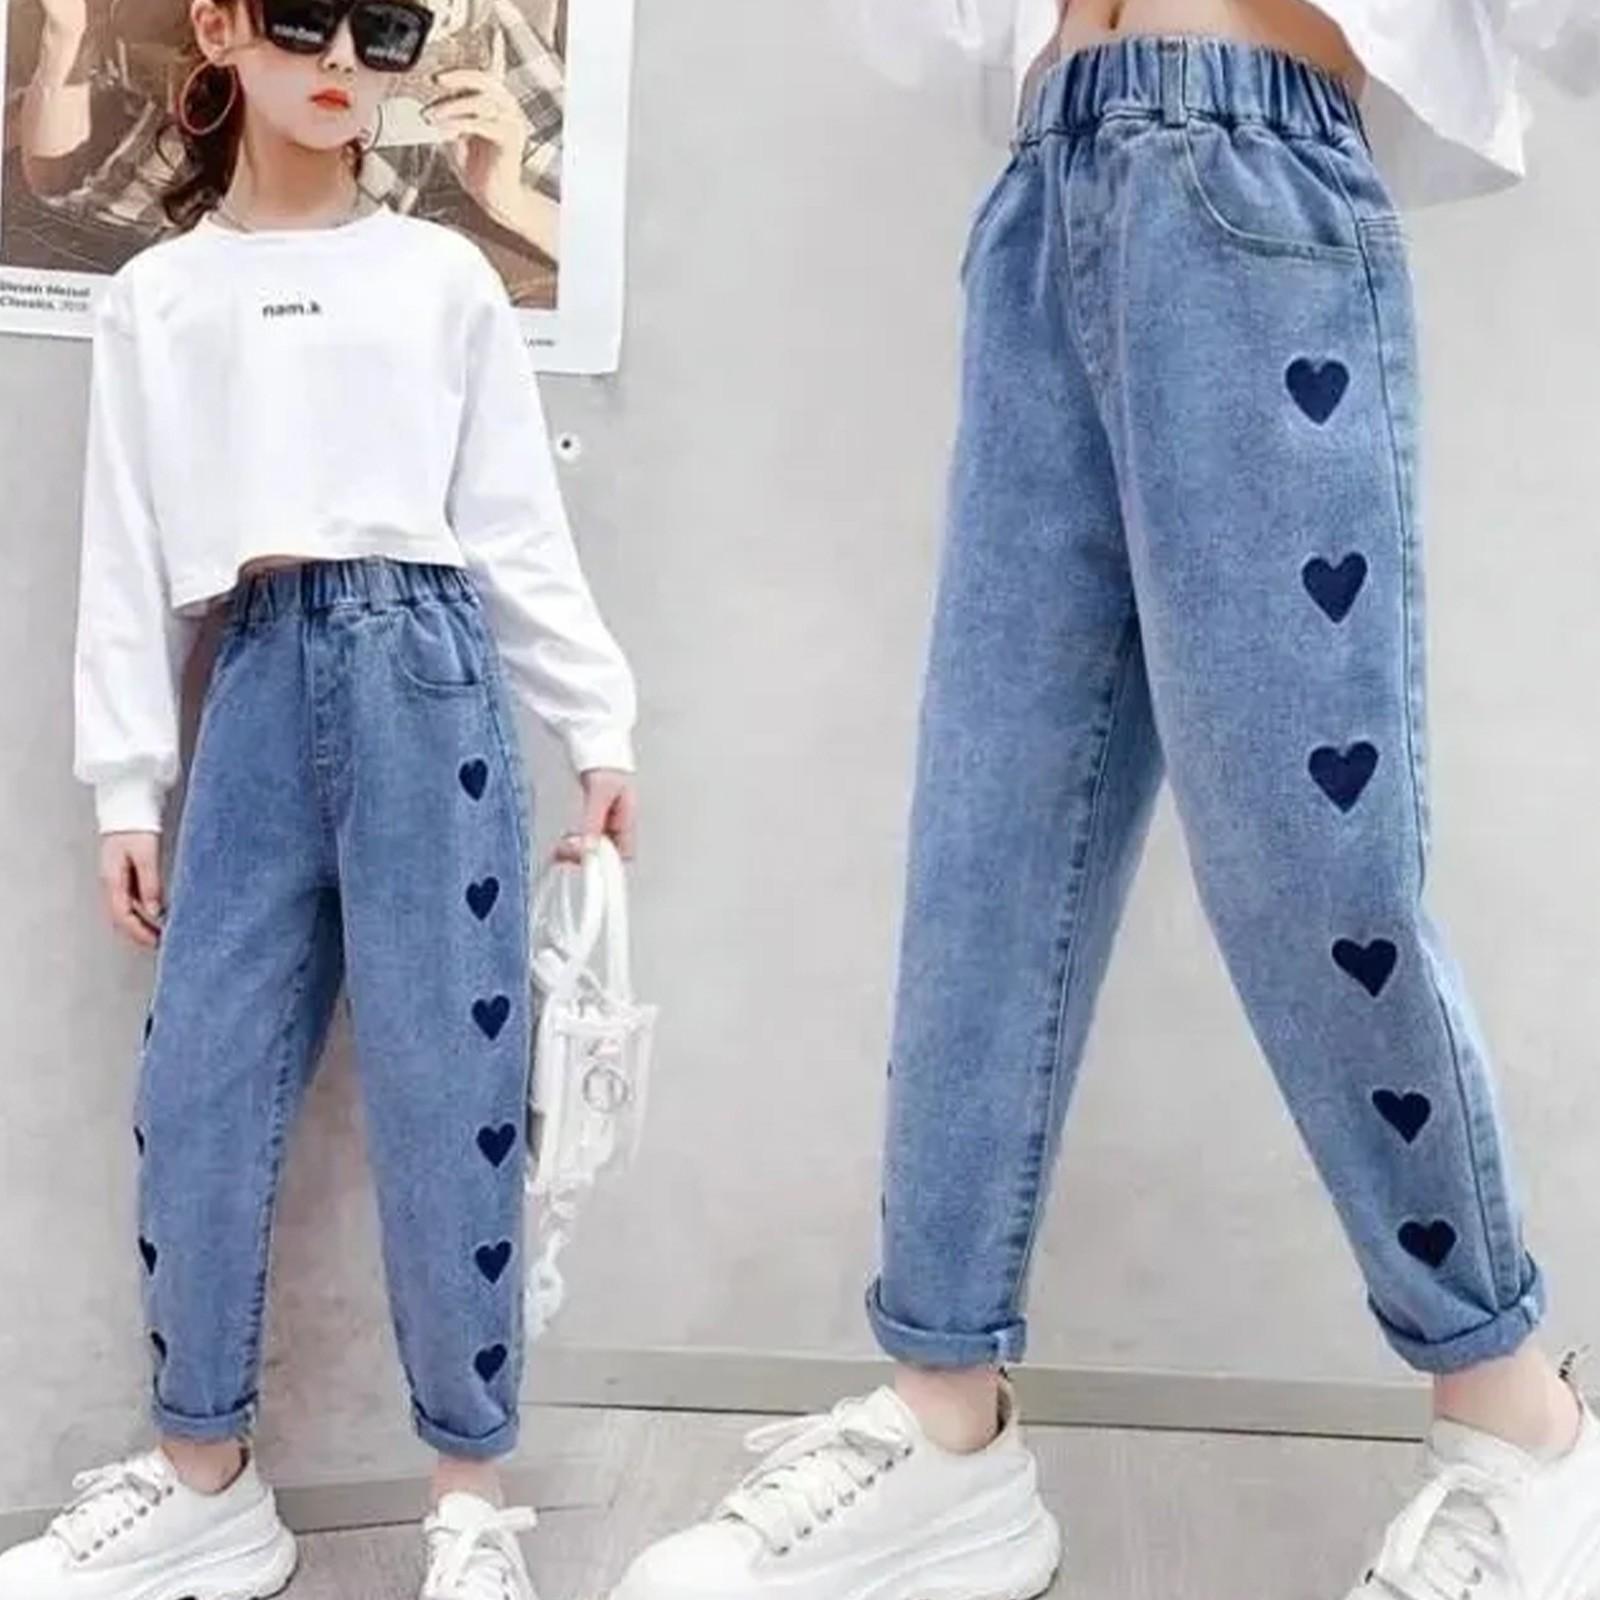 Nobita Girls Fashion Jeans With Pockets Embroidered Peach Heart Denim Pants